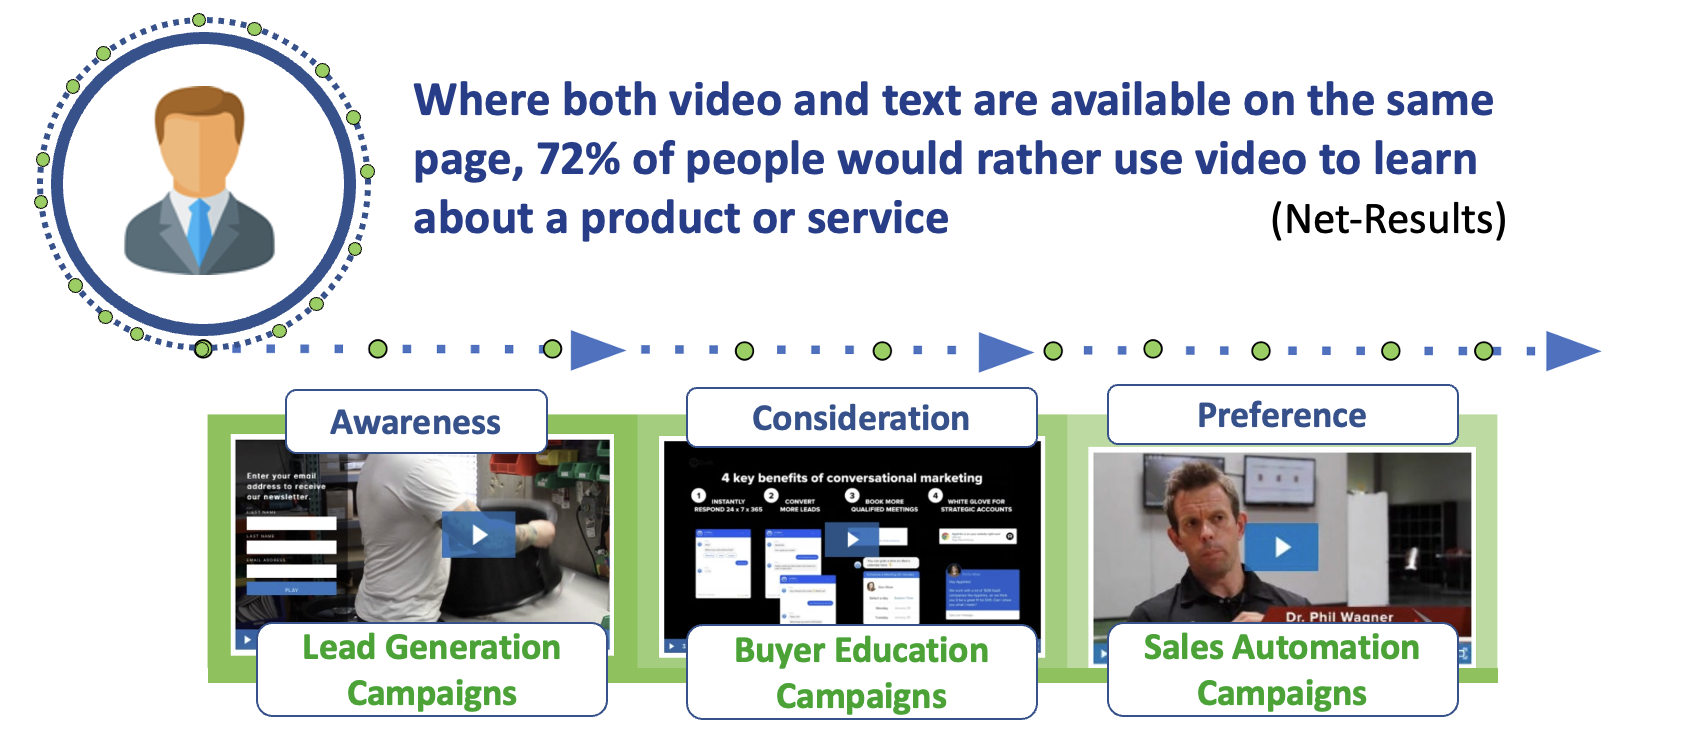 Video Trends for B2B Sales